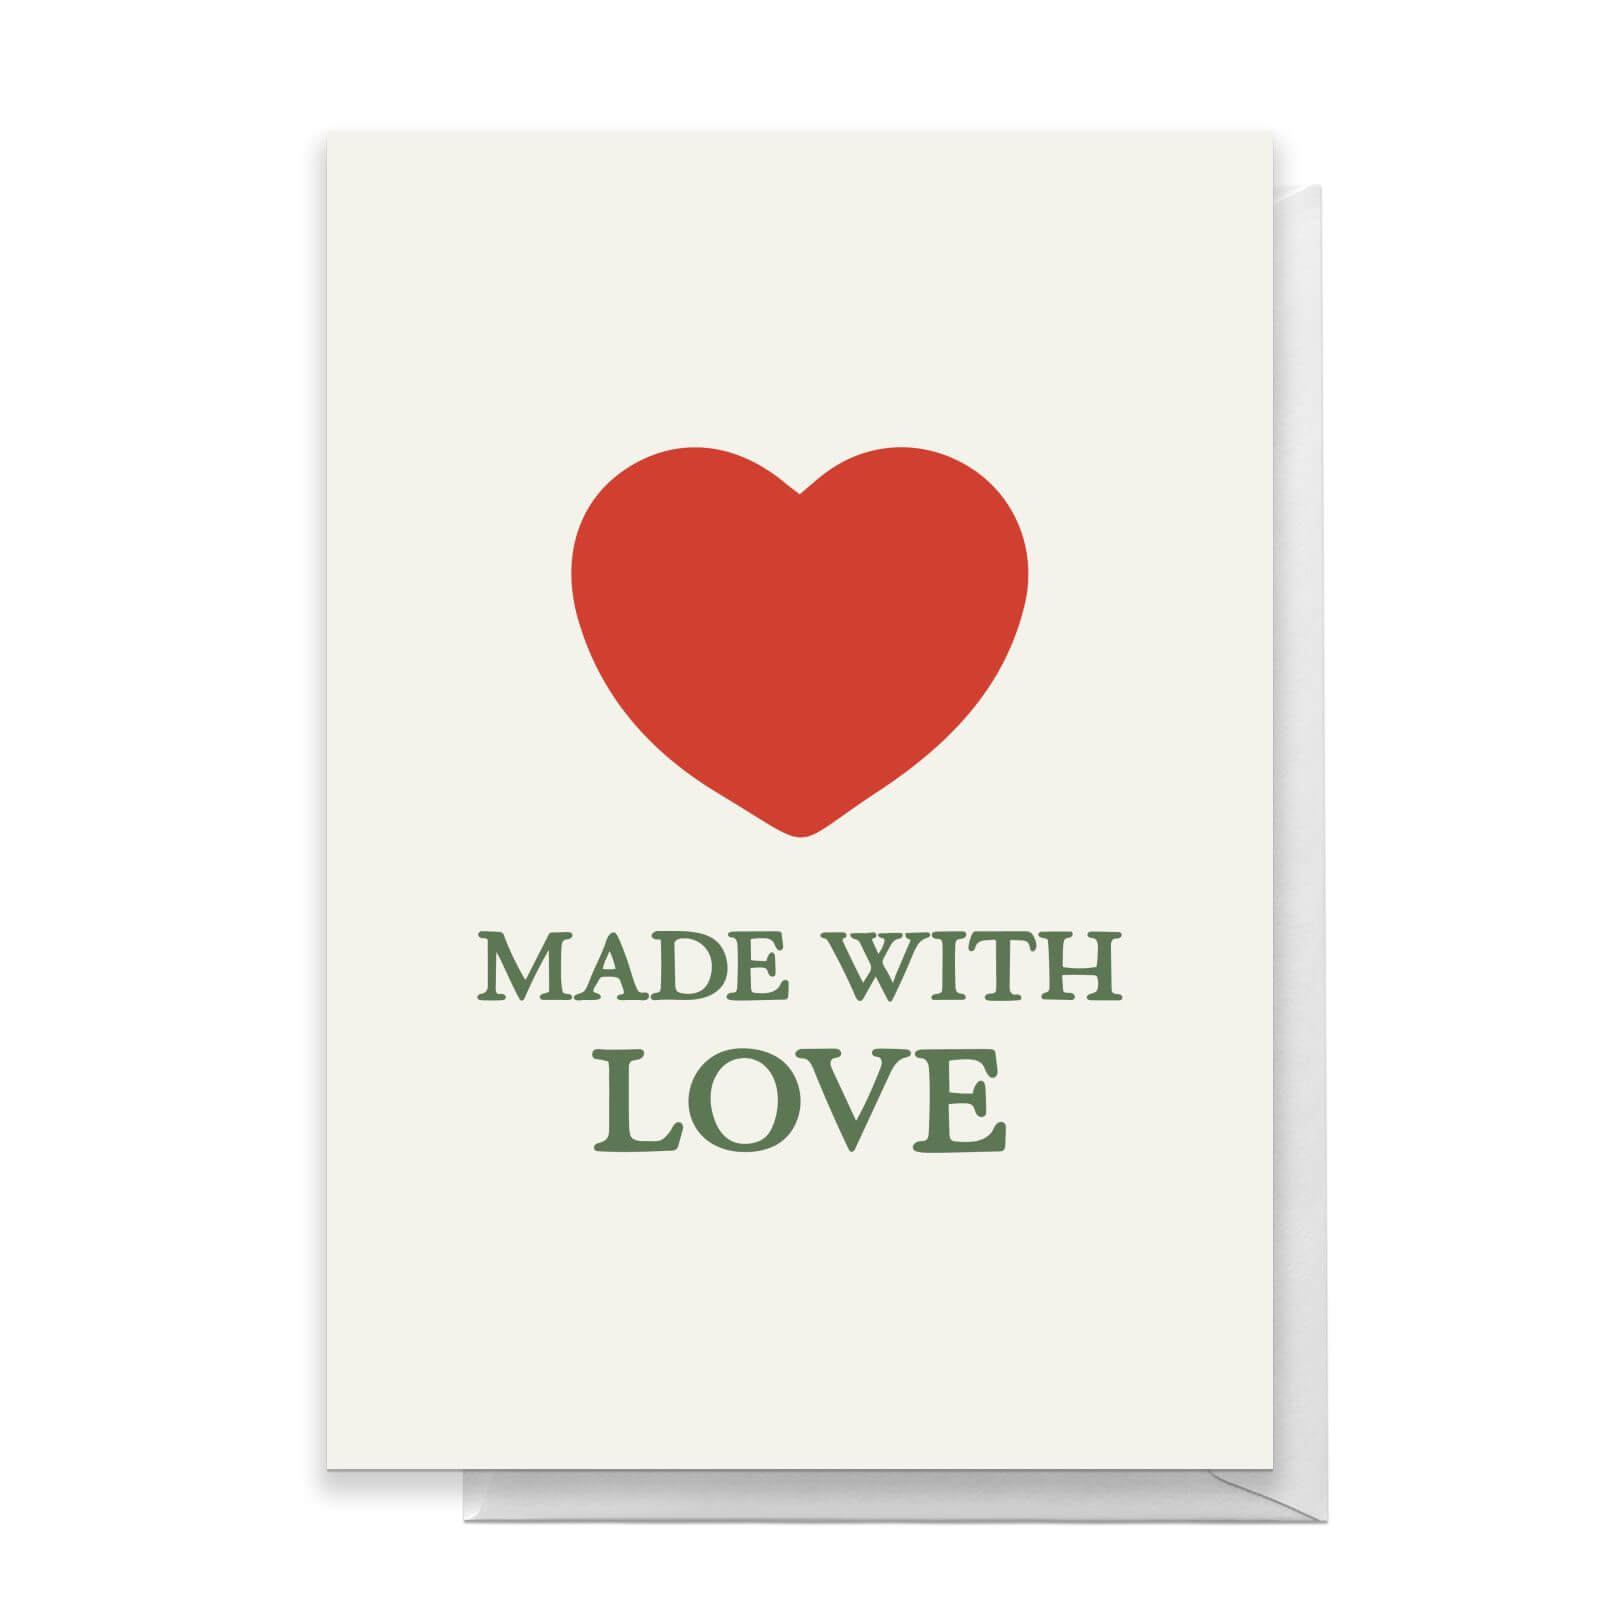 Made With Love Greetings Card - Standard Card